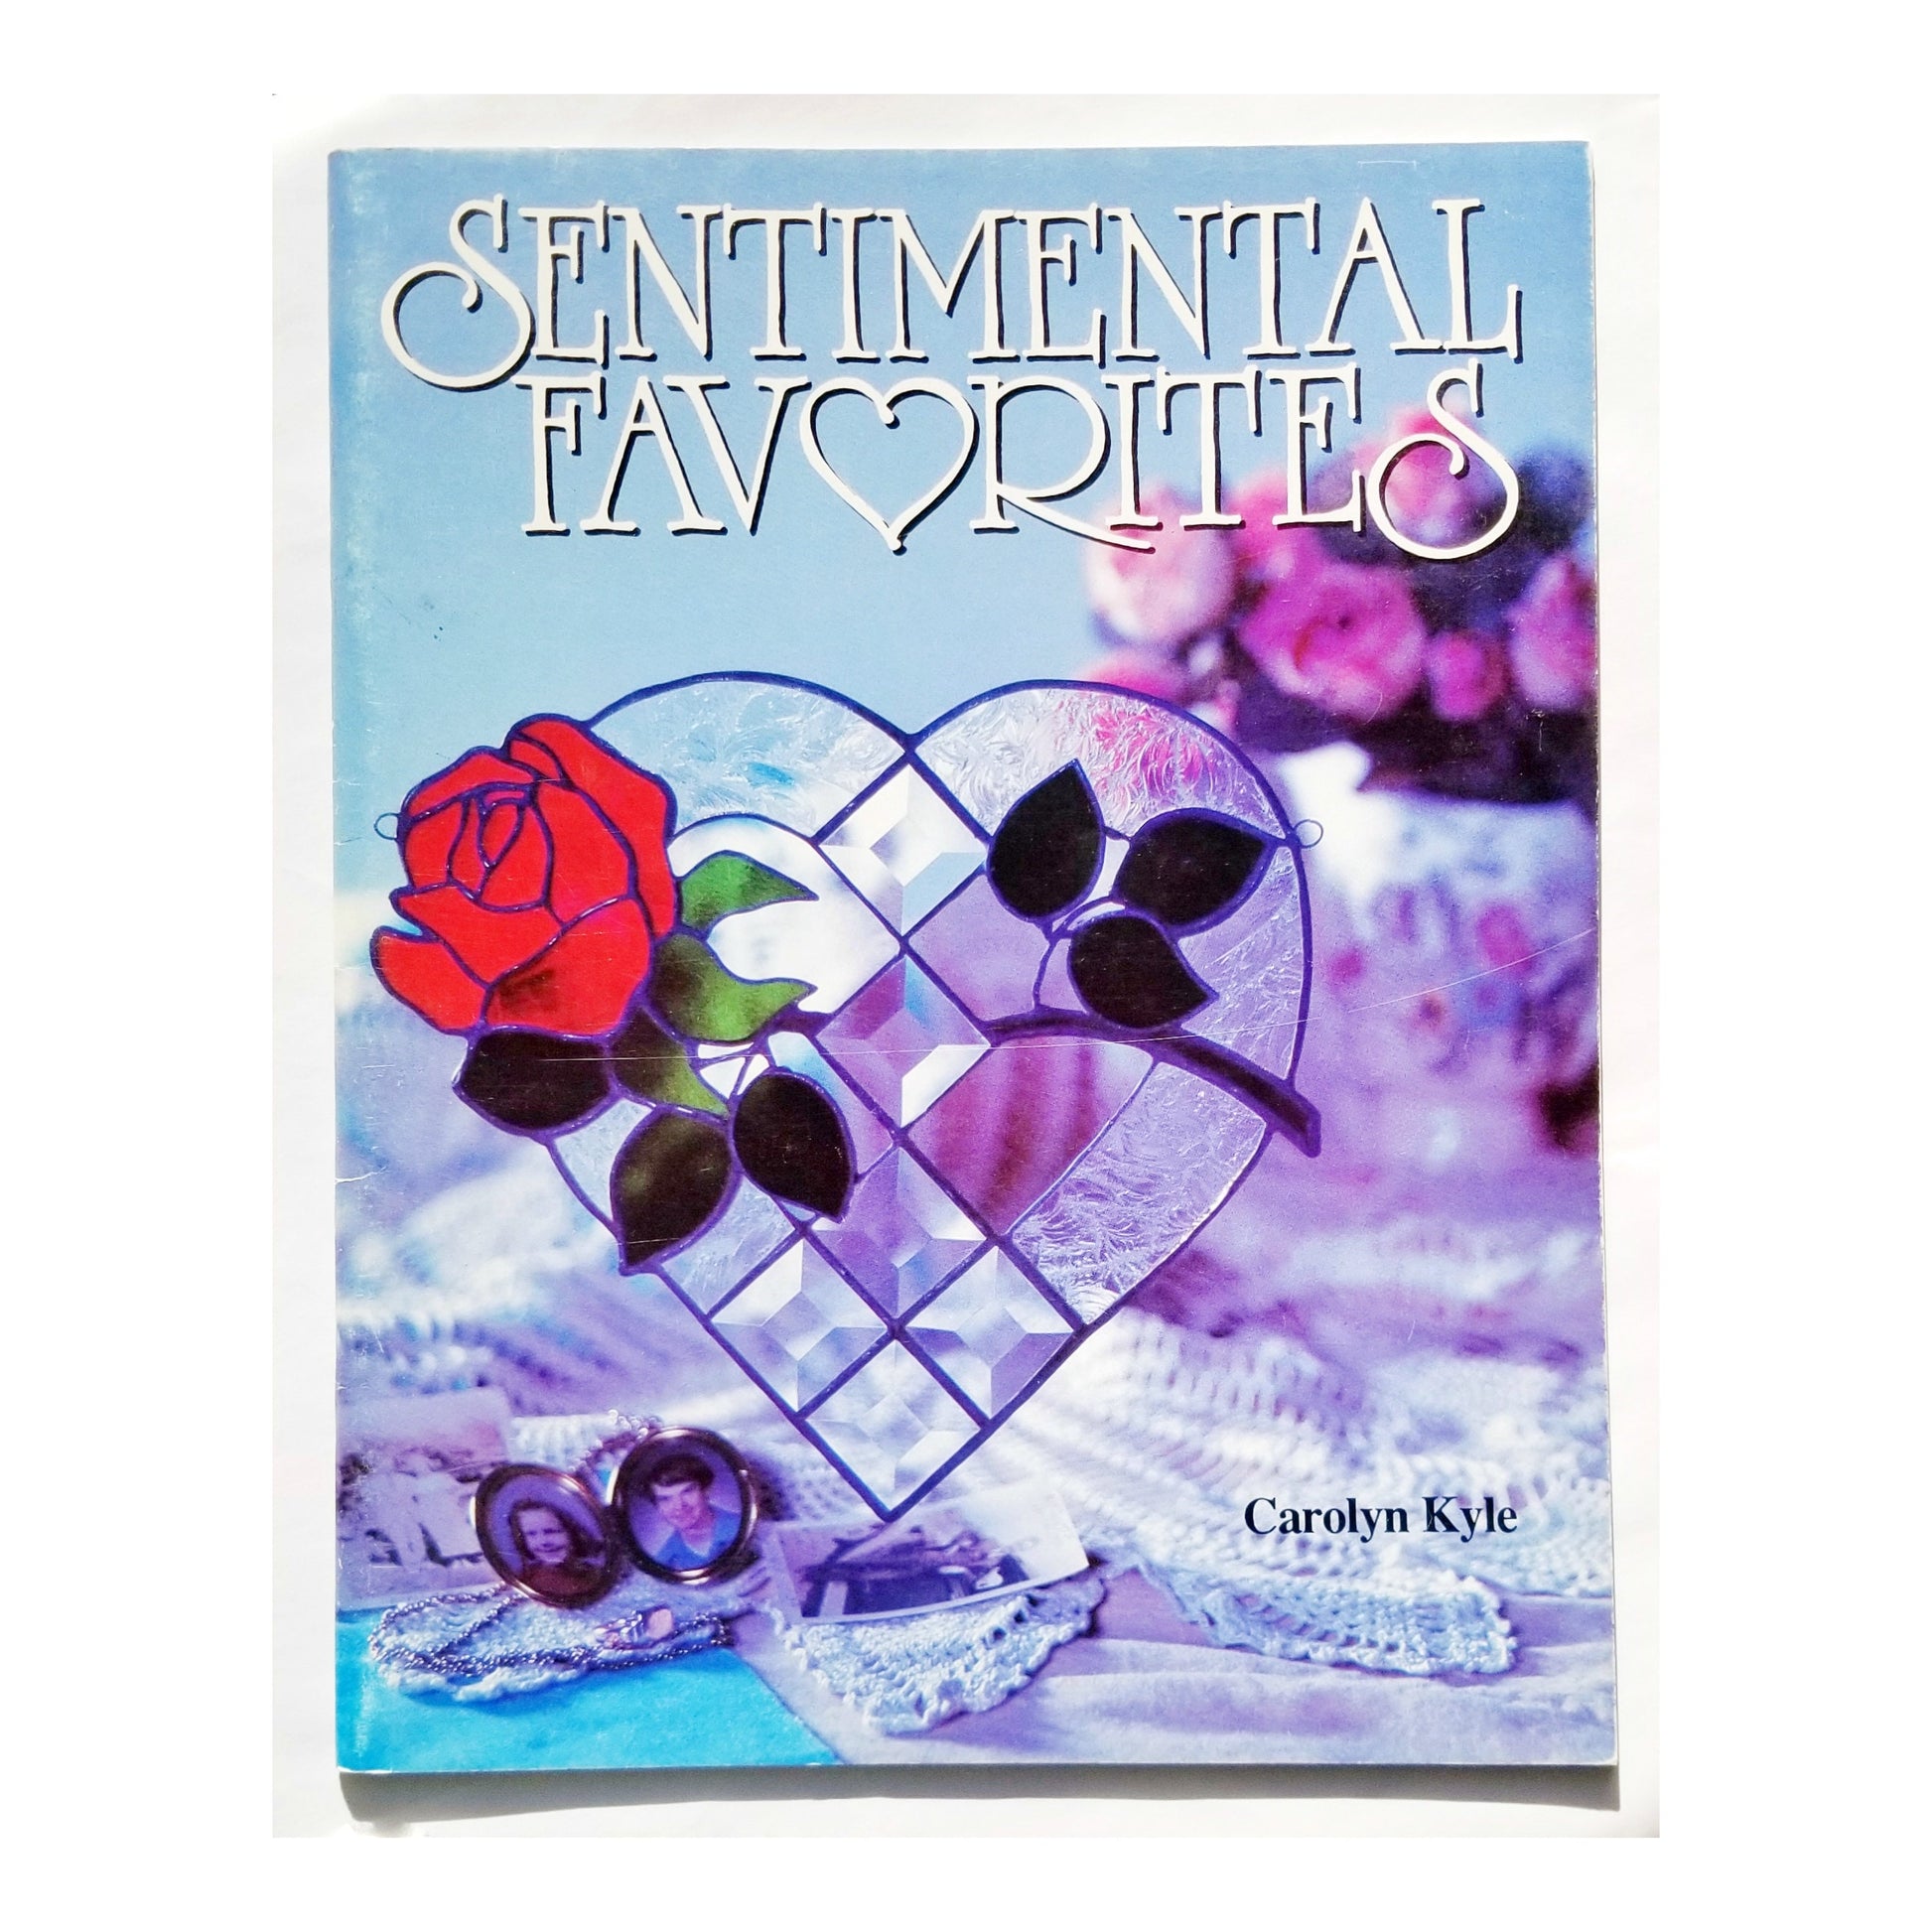 Stained Glass Pattern Book, How to make Panels & Suncatchers. Used in Good Condition. Designs featuring Bevels, Roses and Hearts for gifts.